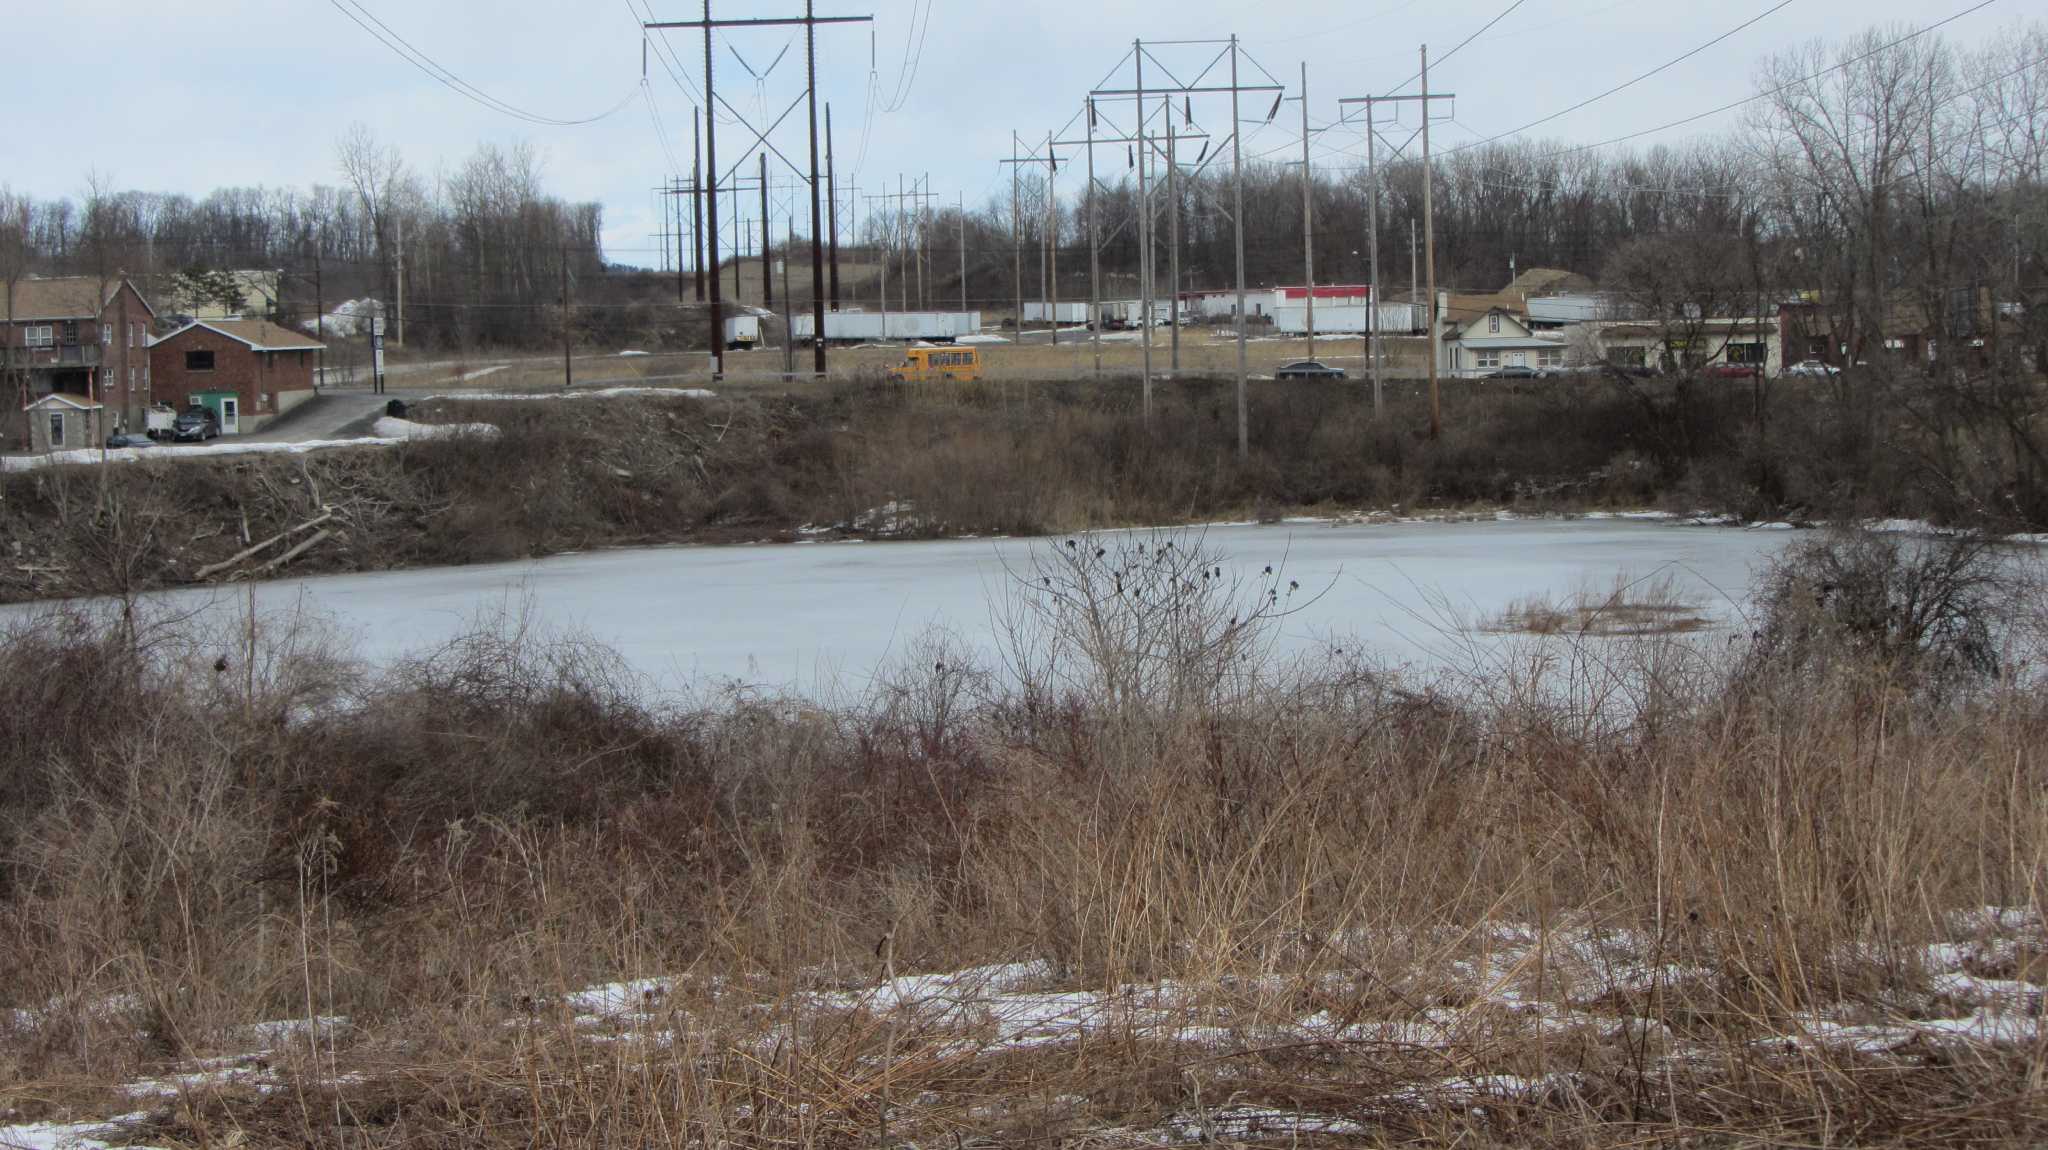 East Greenbush couple sue town over polluted pond